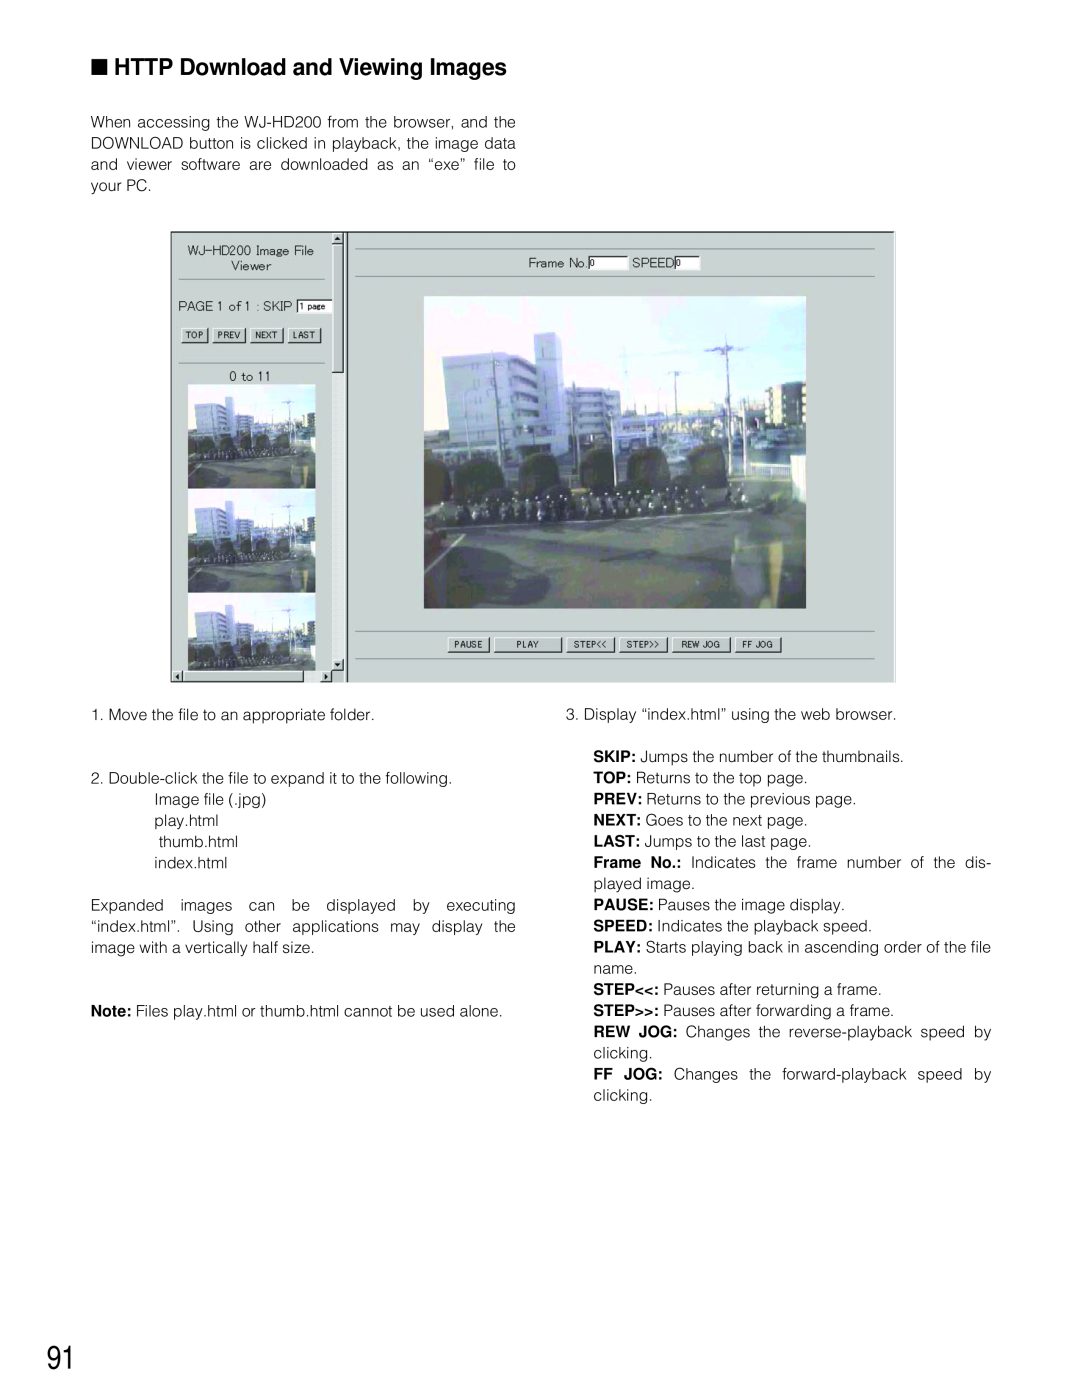 Panasonic WJ-HD200 manual HTTP Download and Viewing Images 